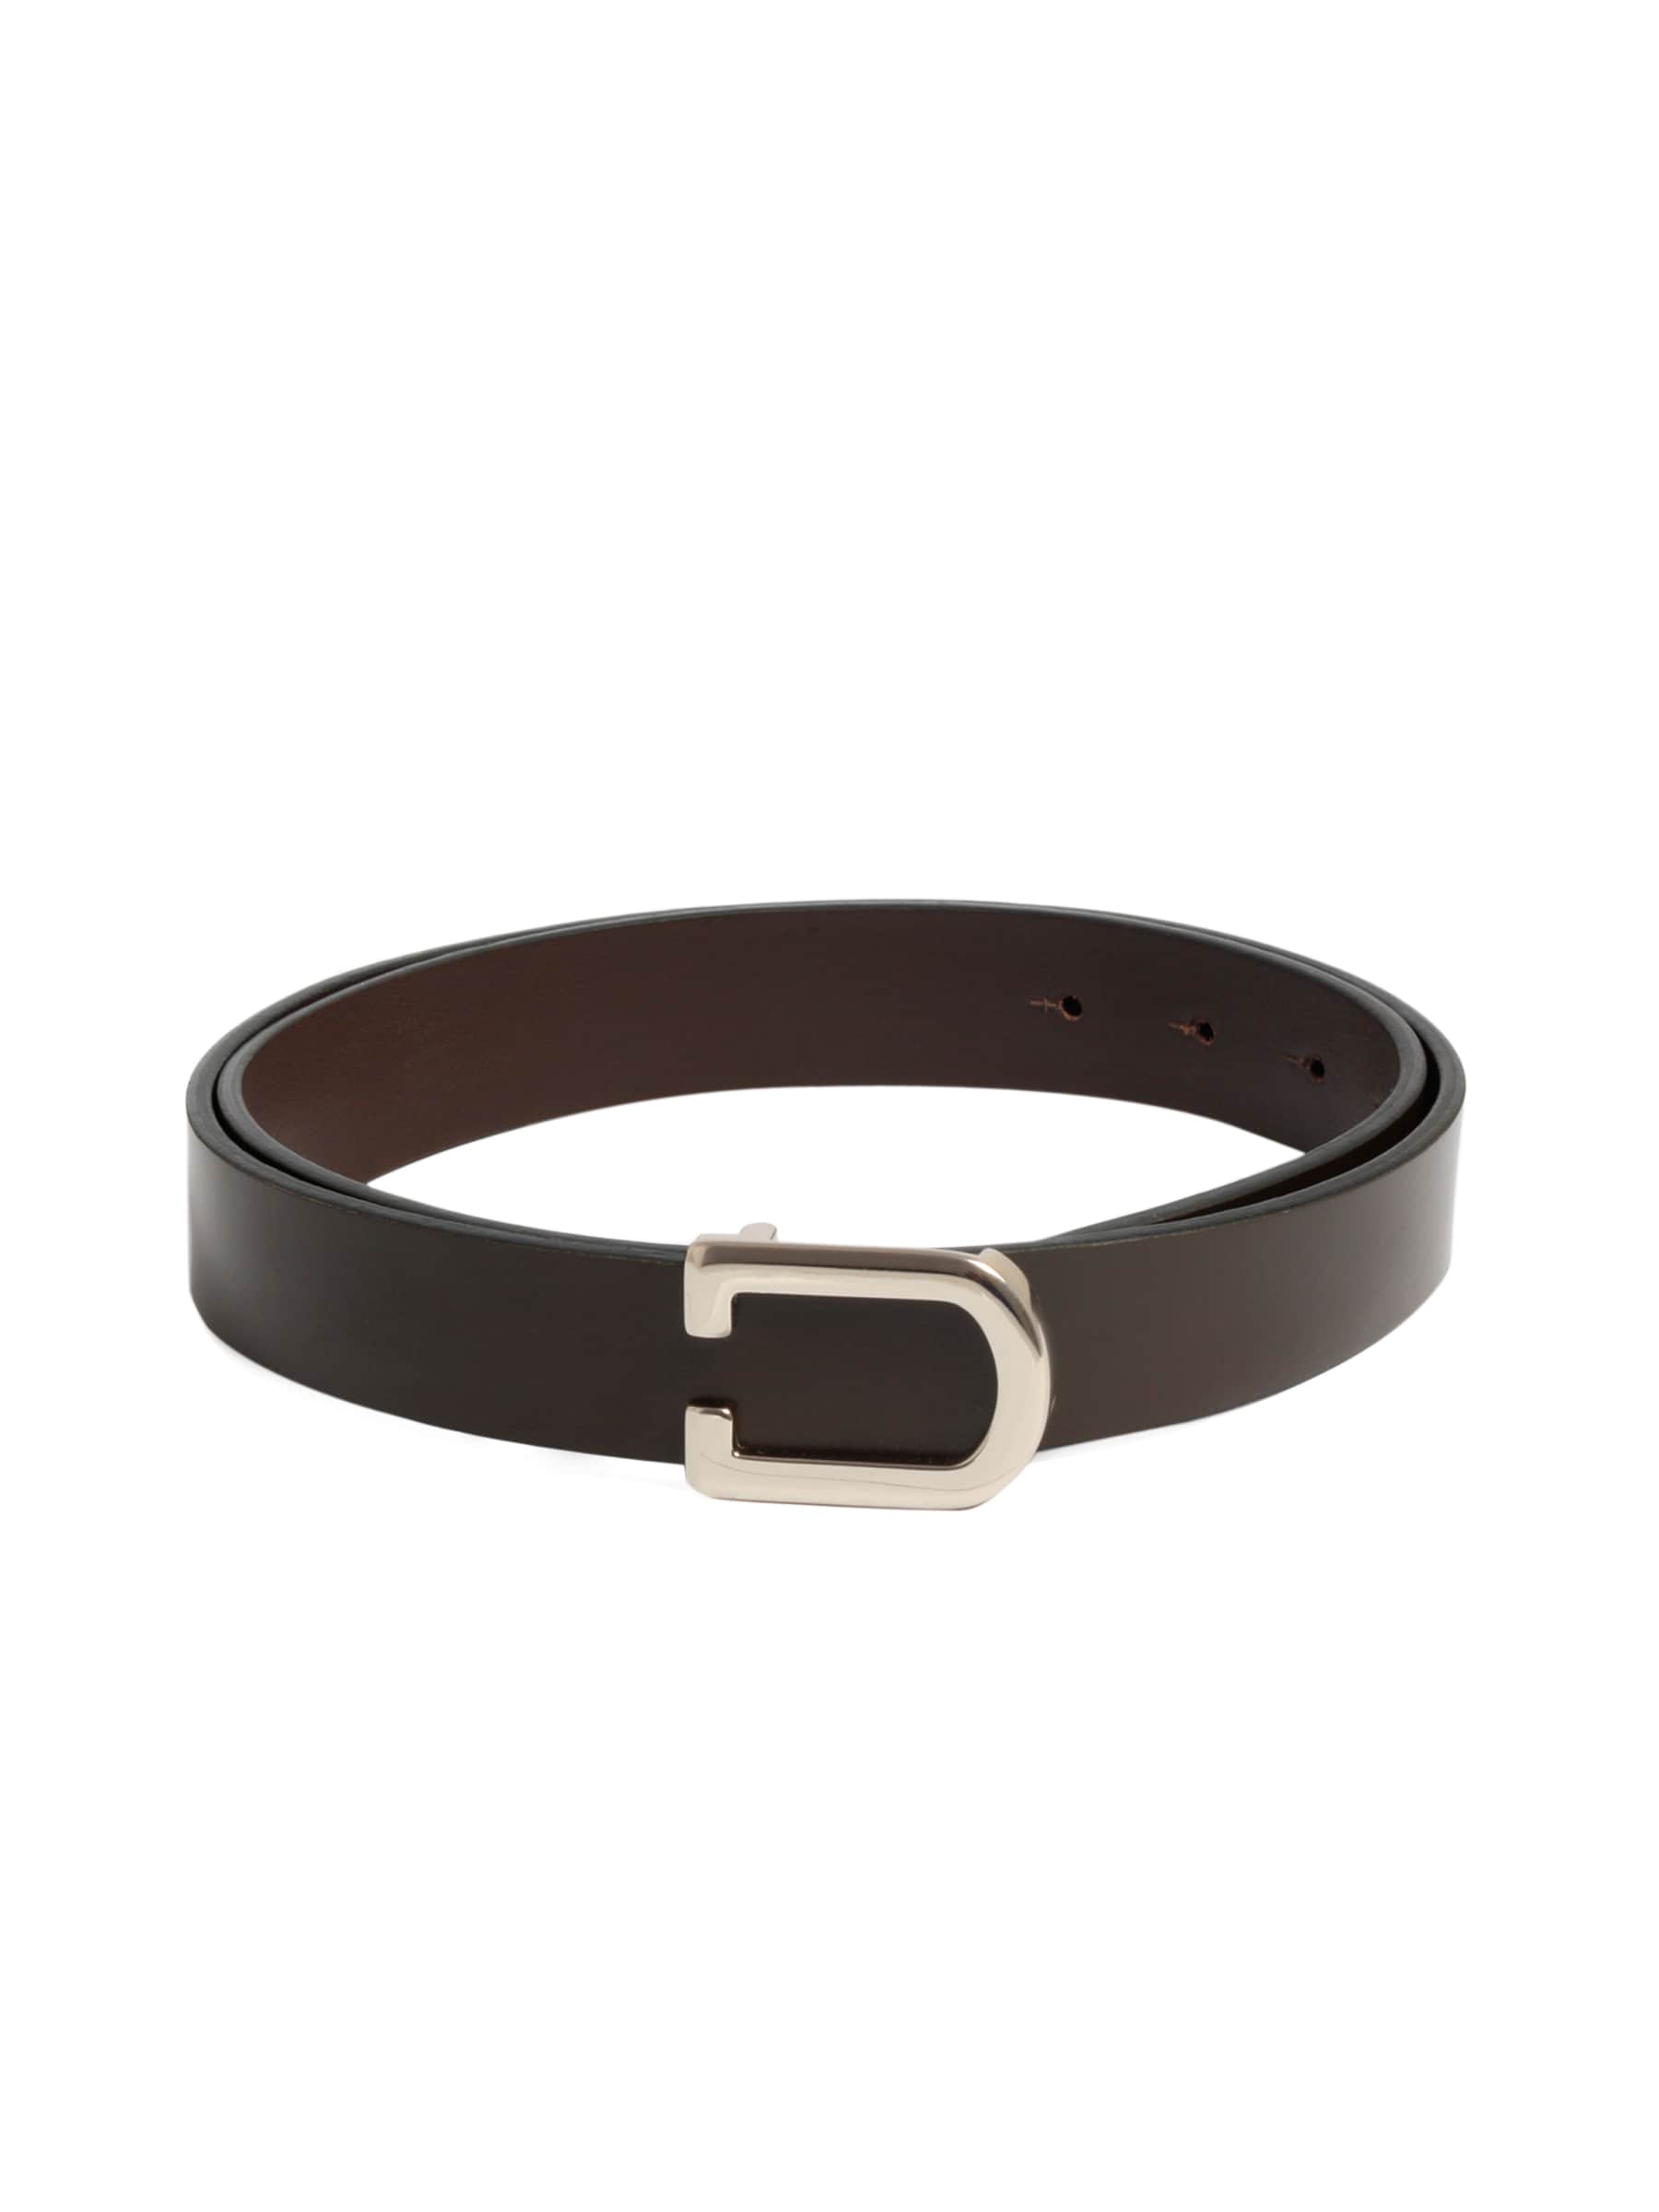 United Colors of Benetton Men Solid Brown Belts